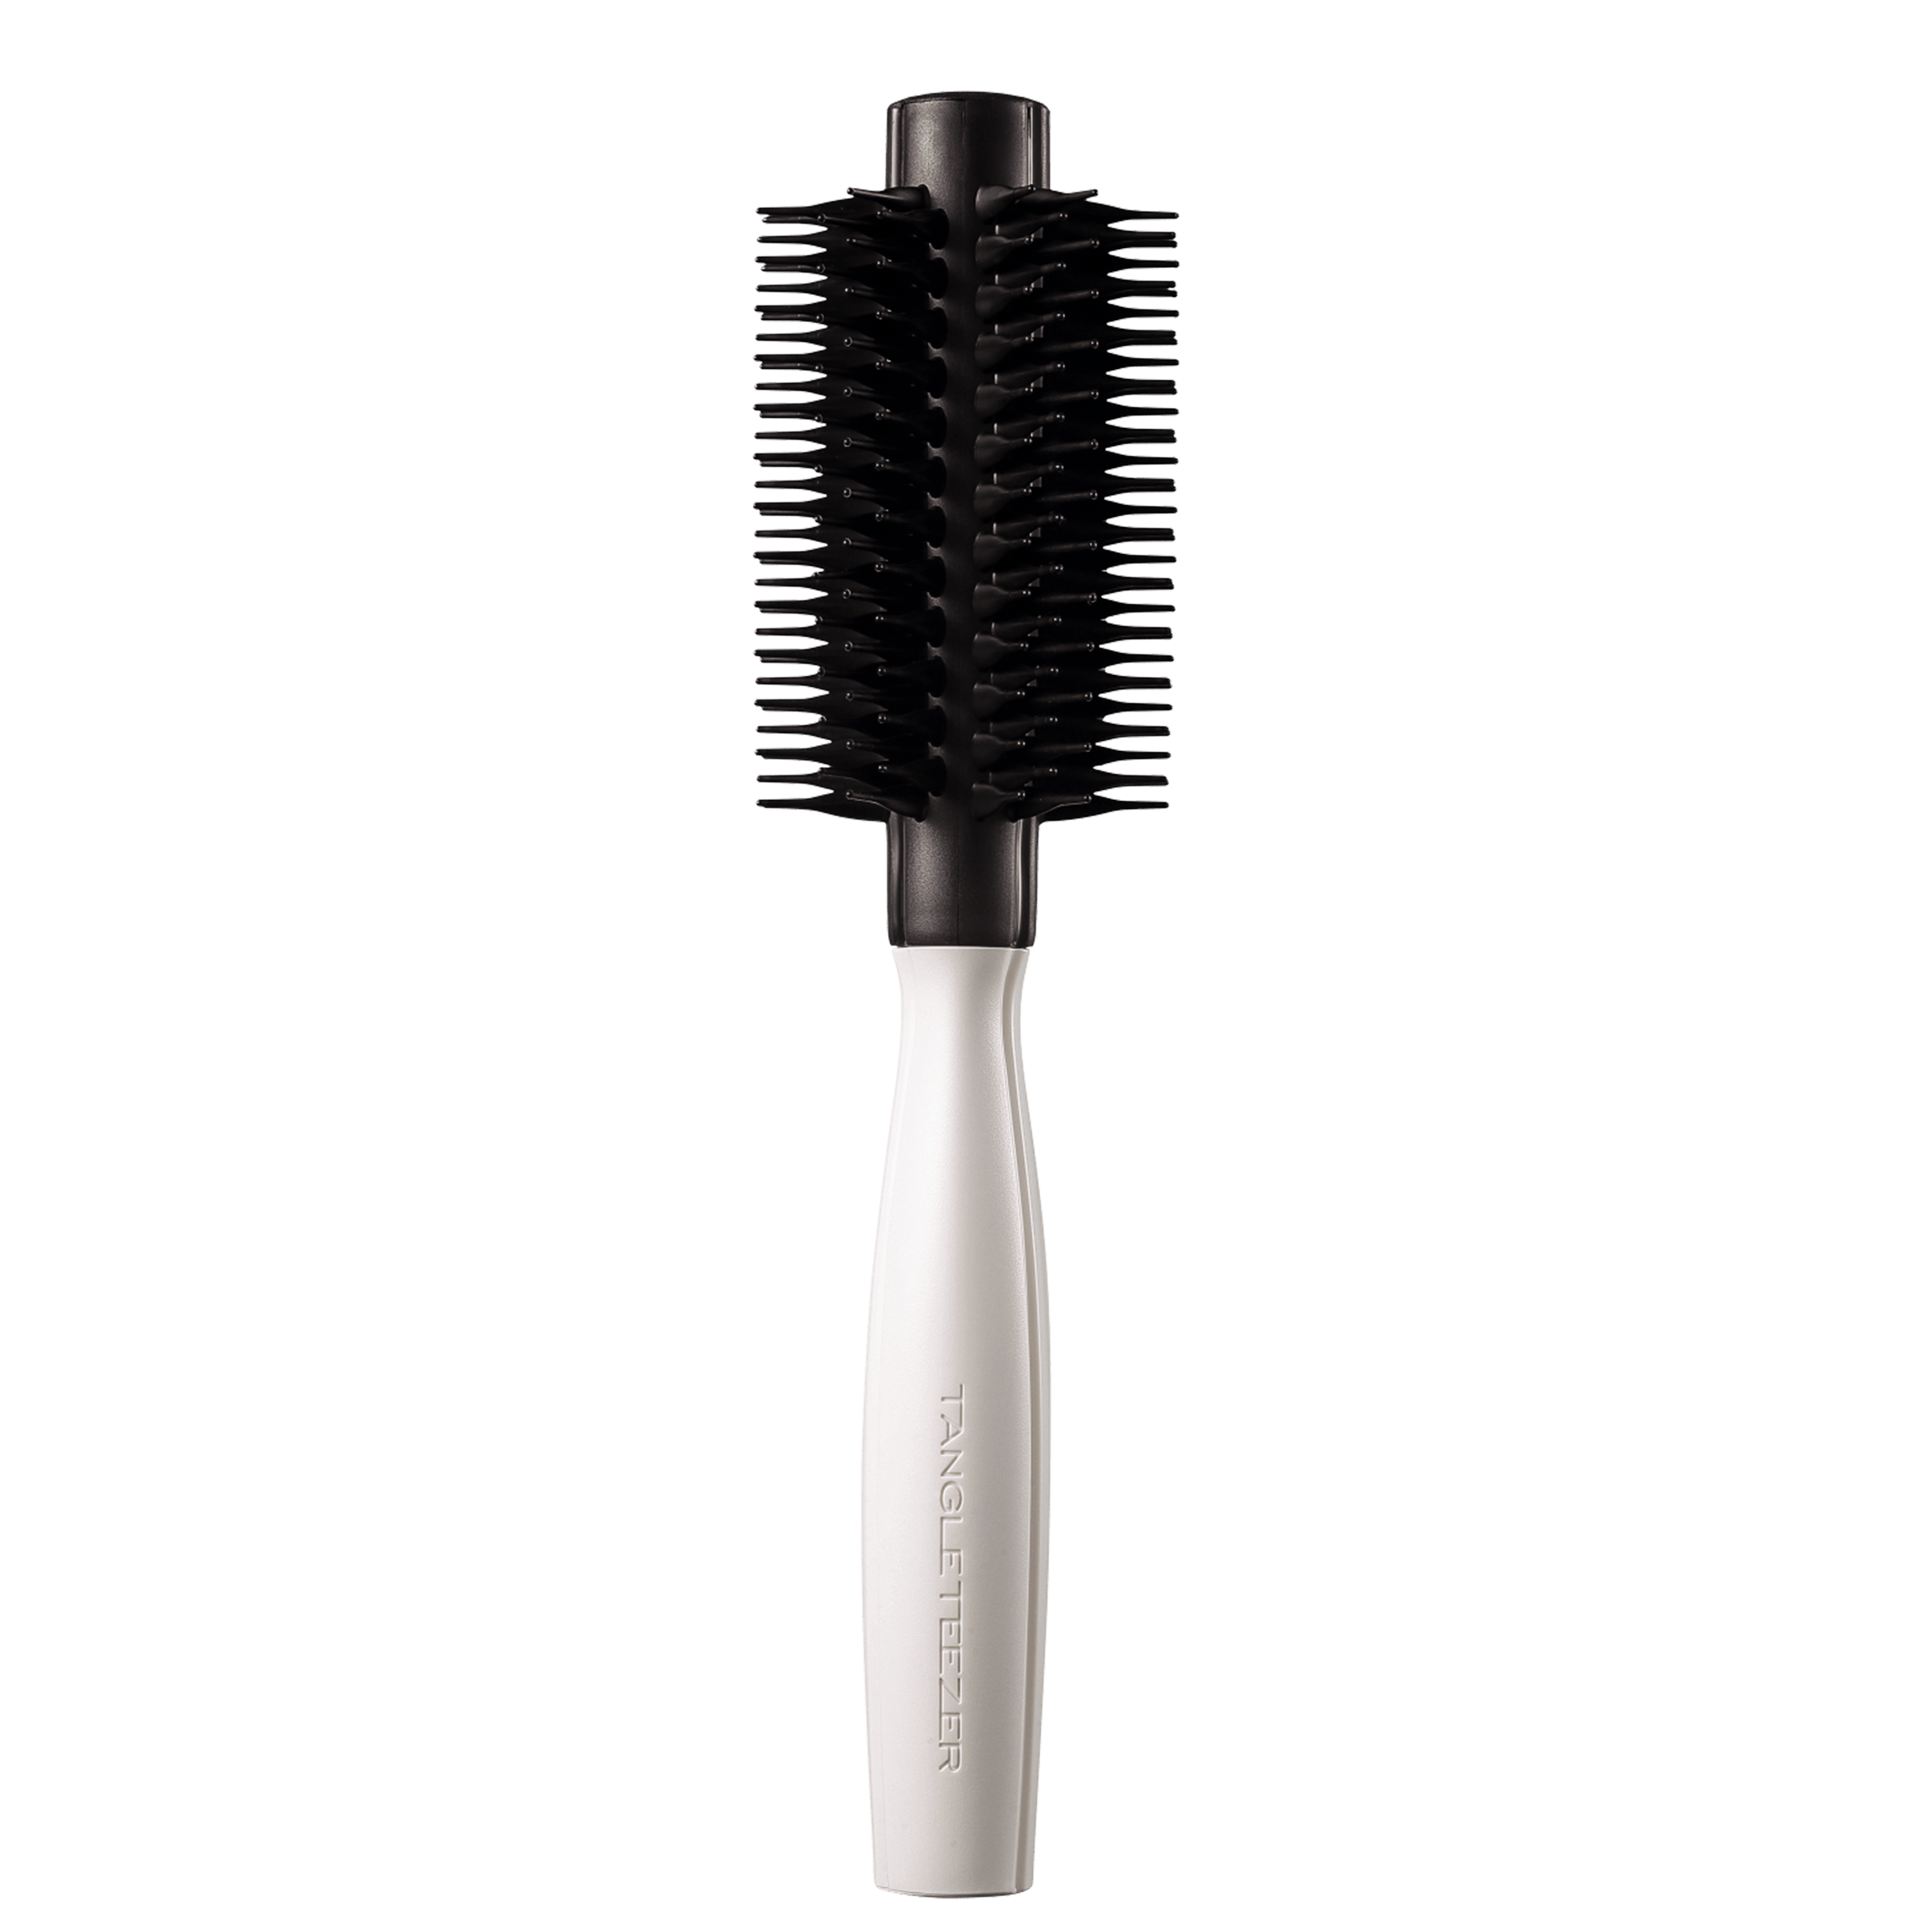 Tangle Teezer Blow Styling Large Round Hair Brush, 1 Count